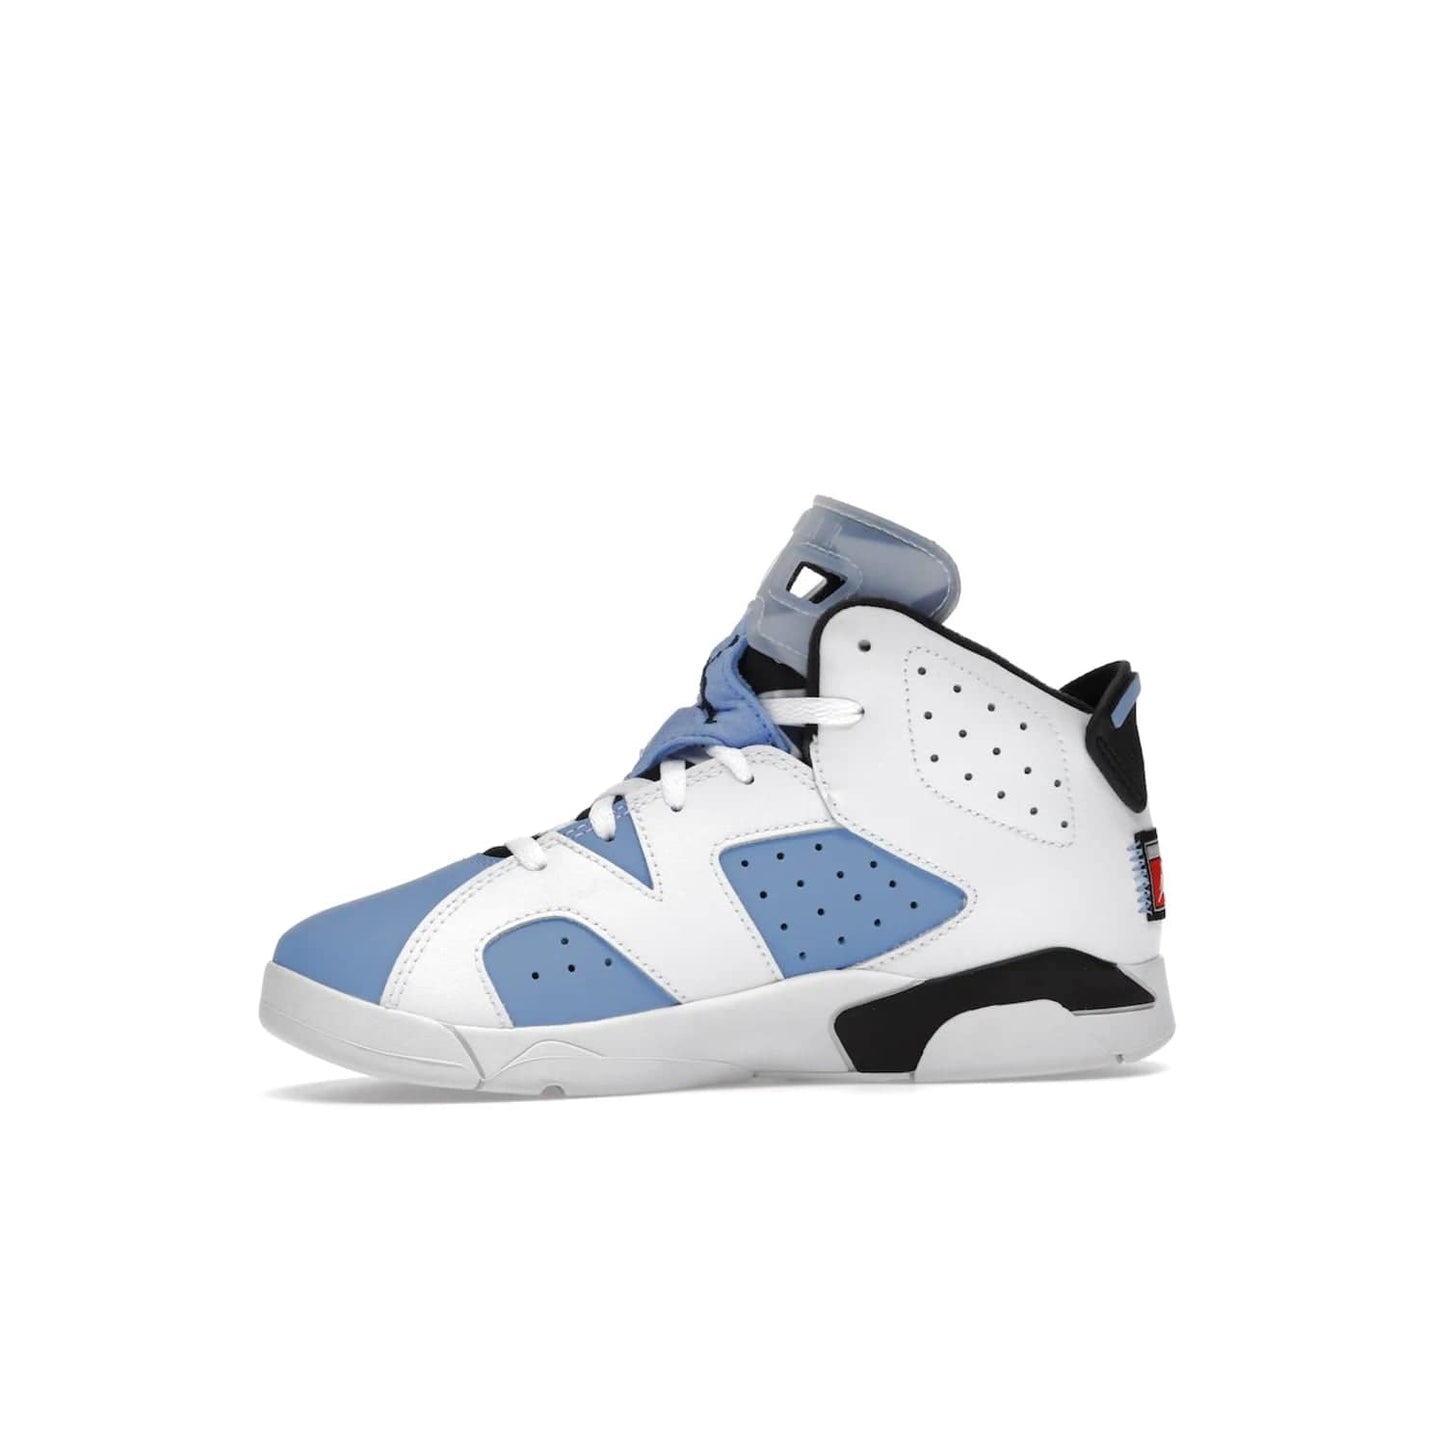 Jordan 6 Retro UNC White (PS) - Image 18 - Only at www.BallersClubKickz.com - The Air Jordan 6 Retro UNC White PS celebrates Michael Jordan's alma mater, the University of North Carolina. It features a classic color-blocking of the iconic Jordan 6 Carmine and a stitched Jordan Team patch. This must-have sneaker released on April 27th, 2022. Referencing the university colors, get this shoe for a stylish and timeless style with university pride.